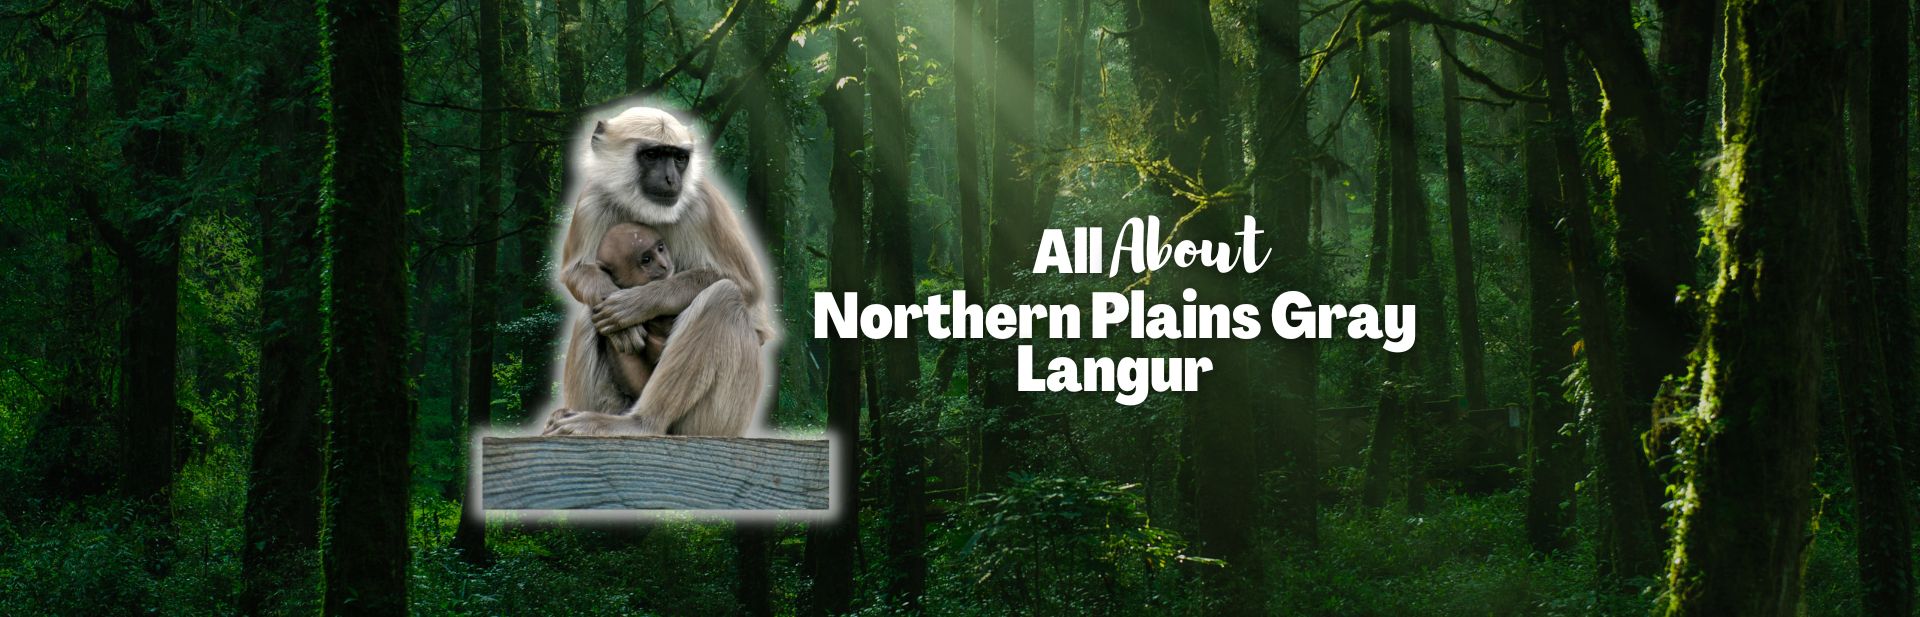 Northern Plains Gray Langur: The Sacred Primate of India